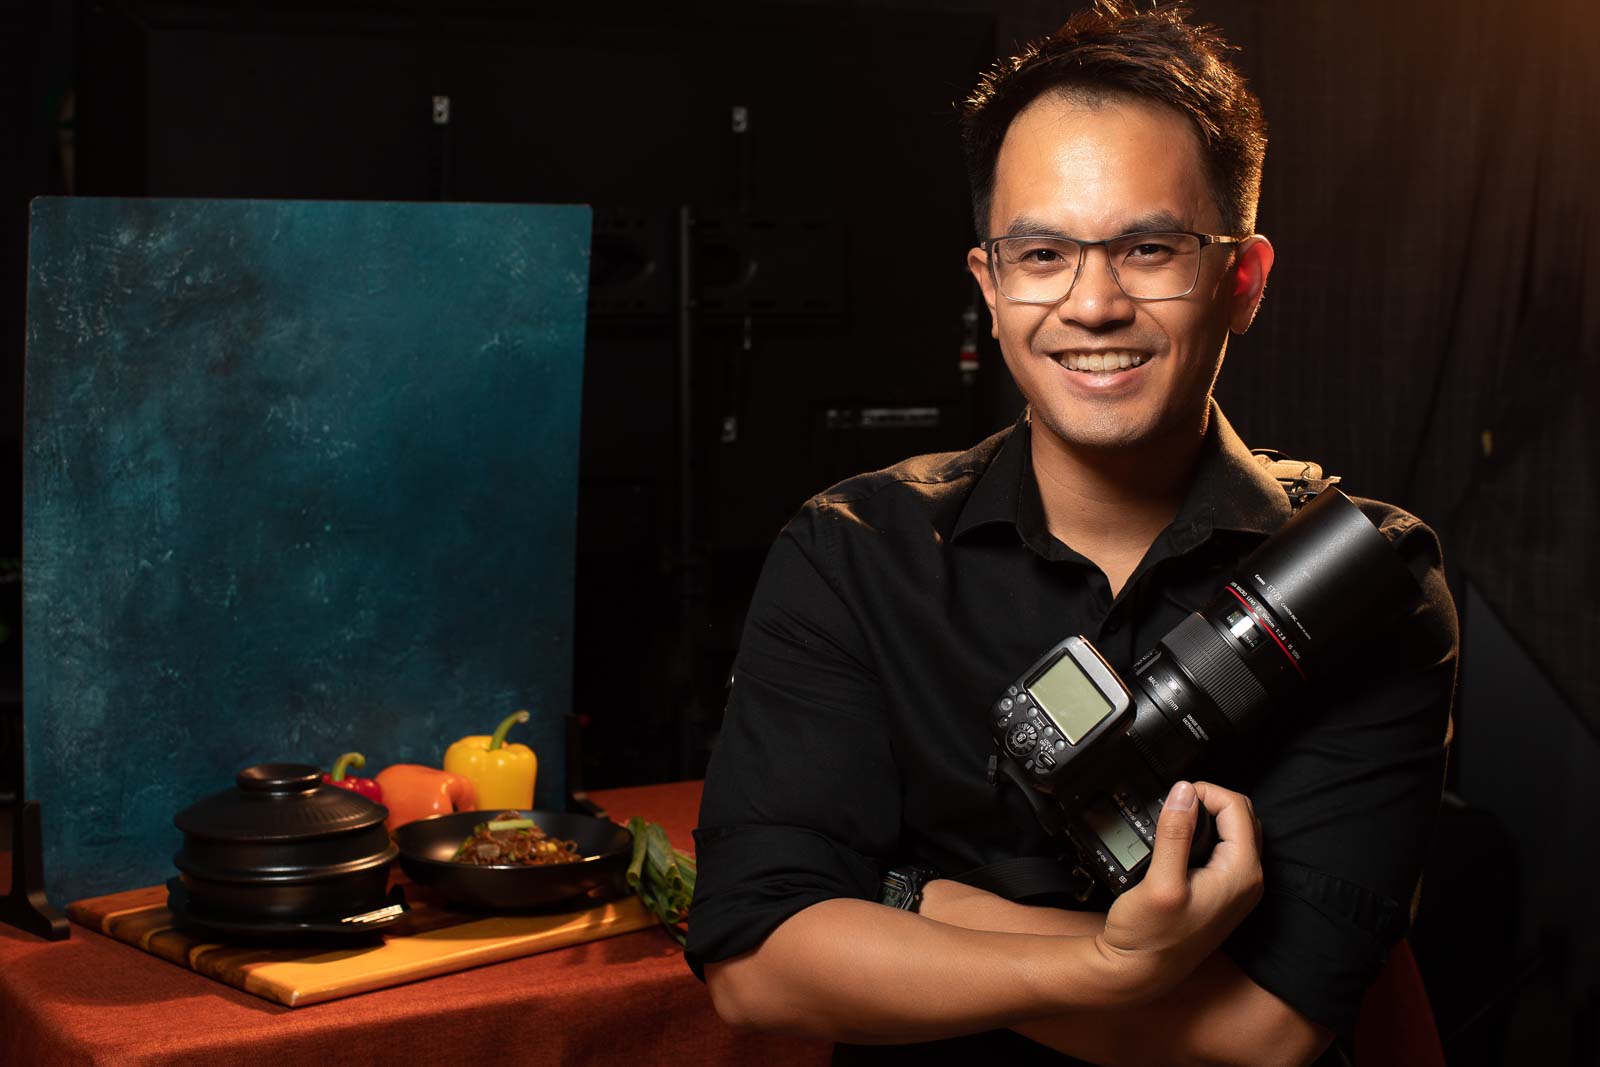 Male holding a professional grade camera in front of a display of meals.